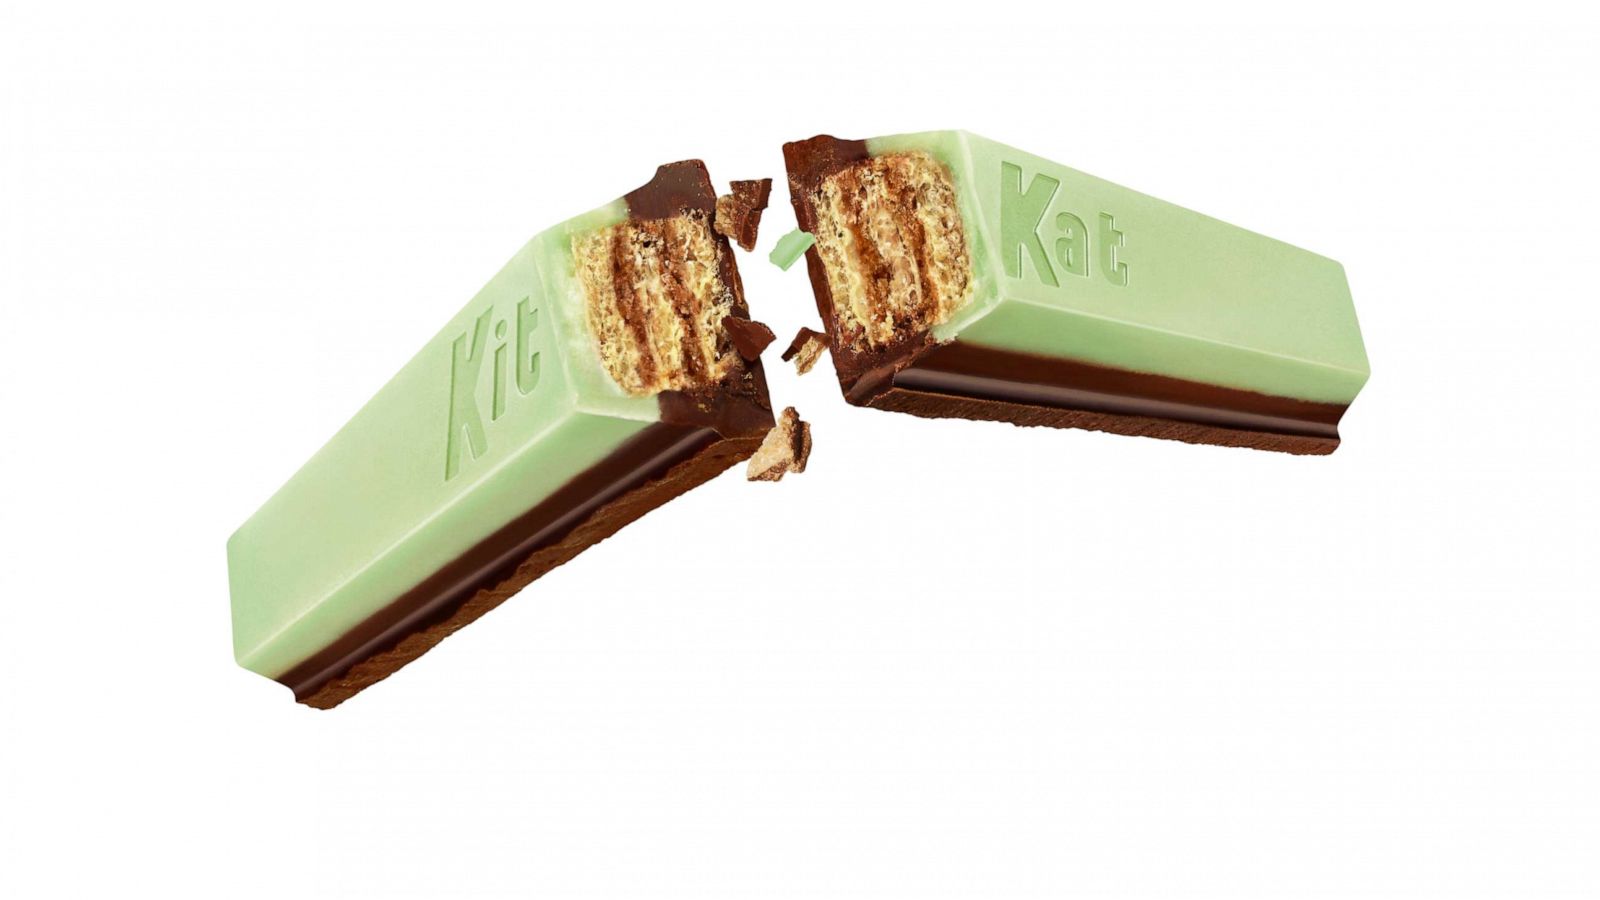 Kit Kat Is Releasing A New Duos Bar With Mint And Dark Chocolate